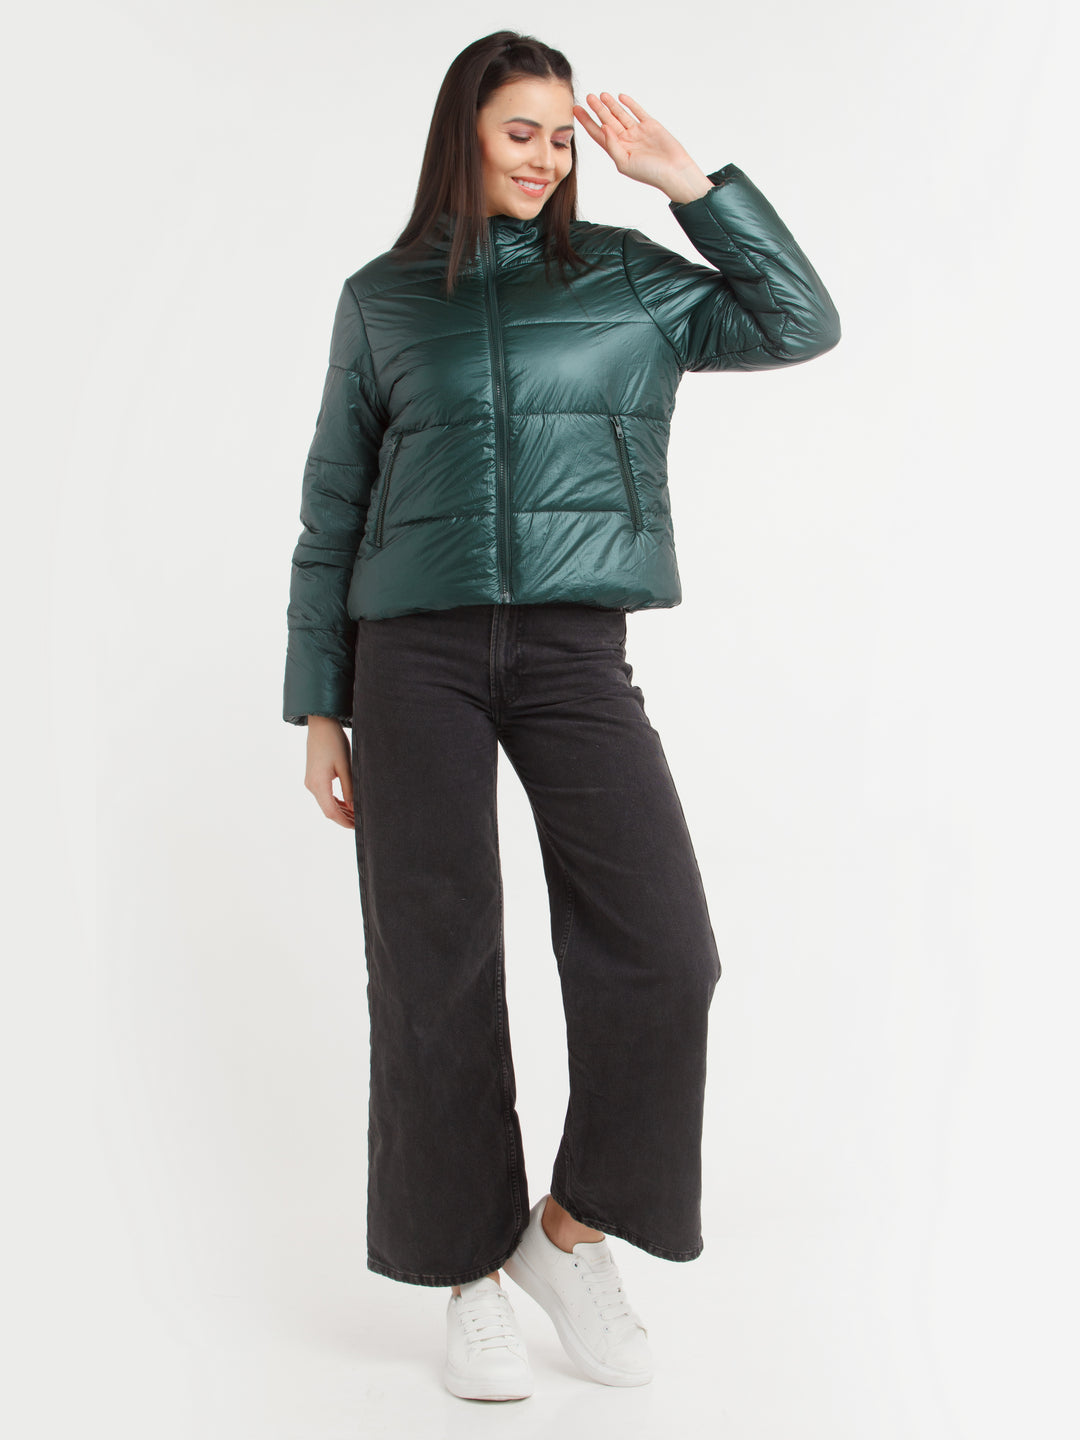 Green Solid Jacket For Women